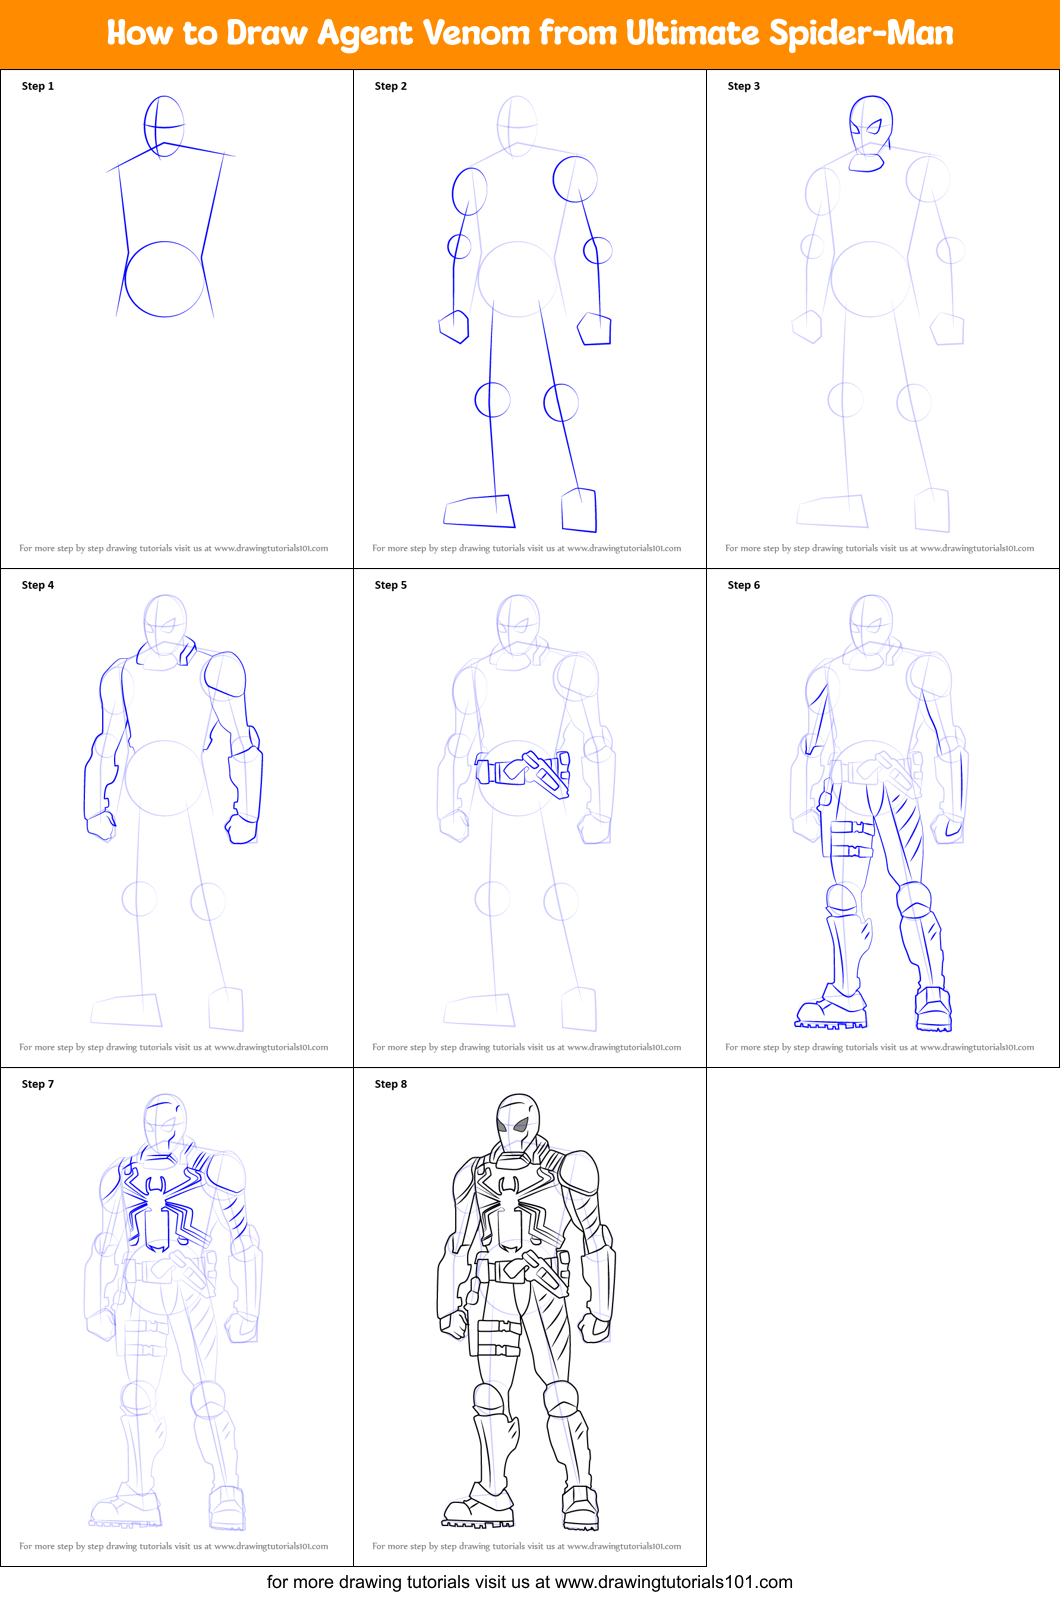 How to Draw Agent Venom from Ultimate Spider-Man printable step by step